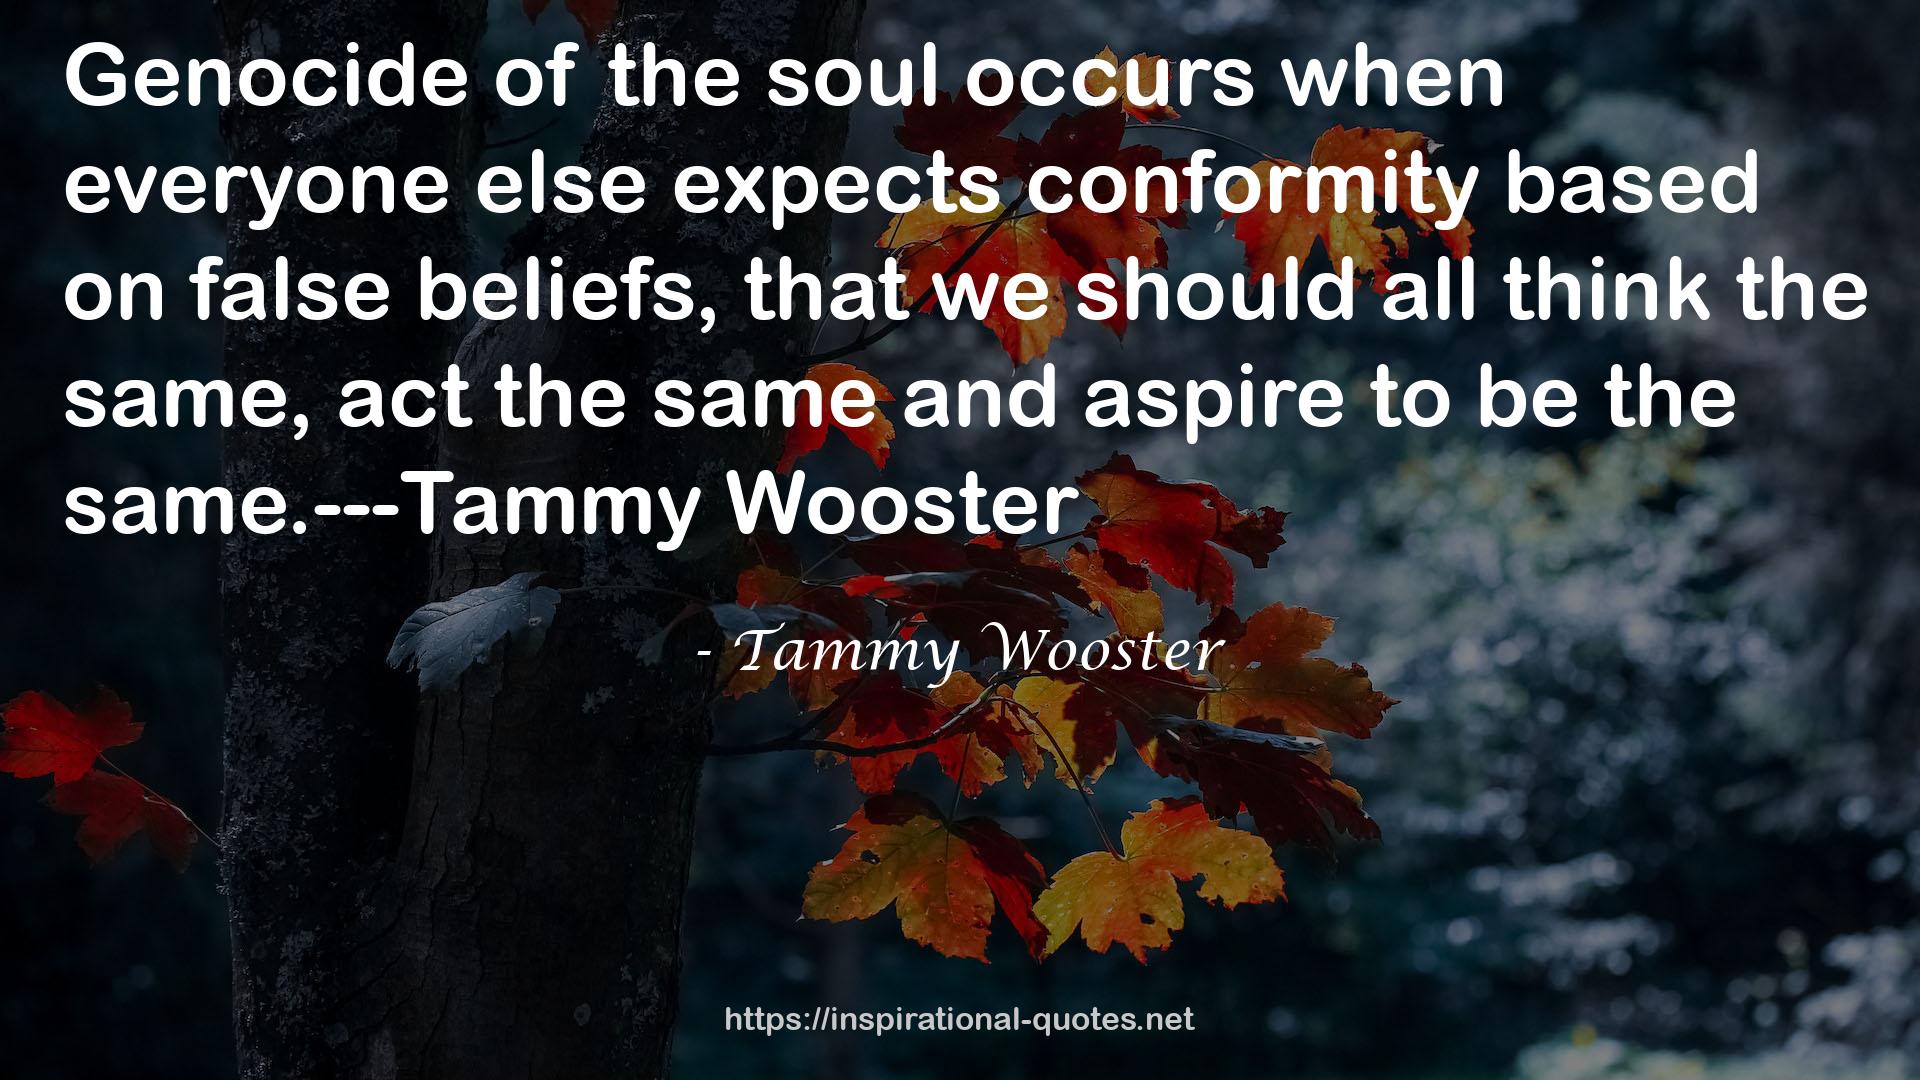 Tammy Wooster QUOTES